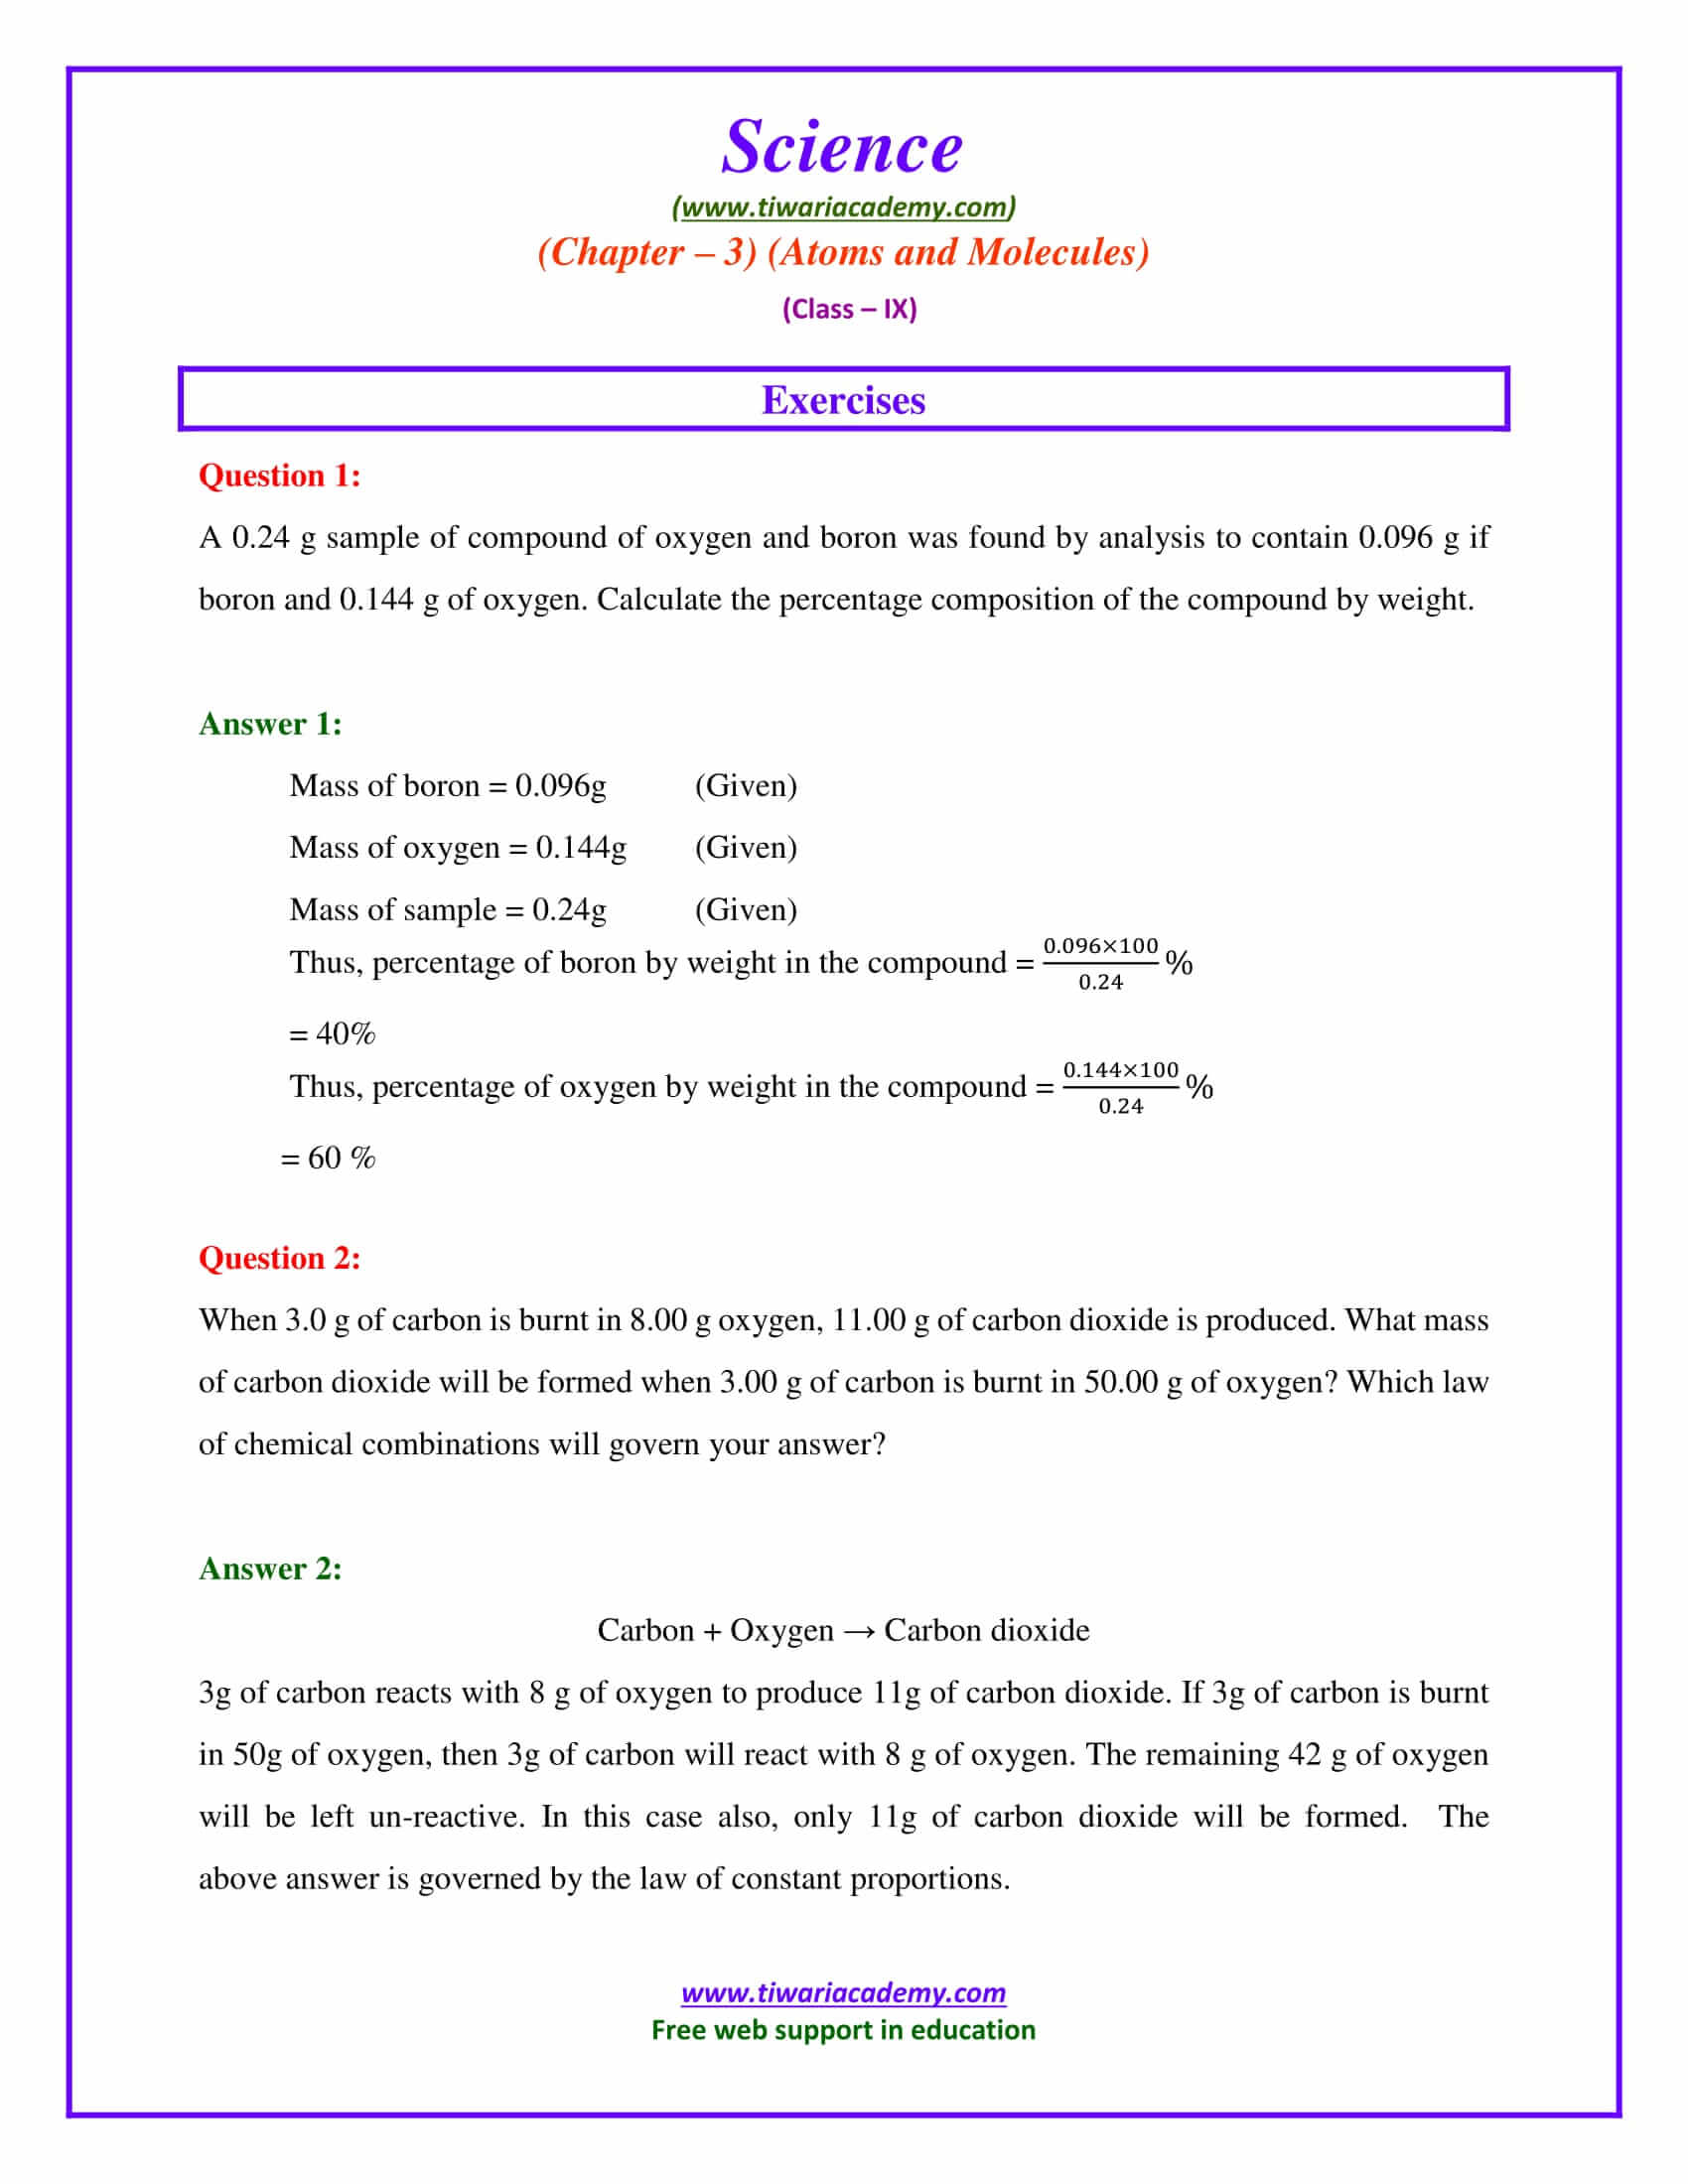 NCERT Solutions for Class 9 Science Chapter 3 Atoms and Molecules Exercises Question answers